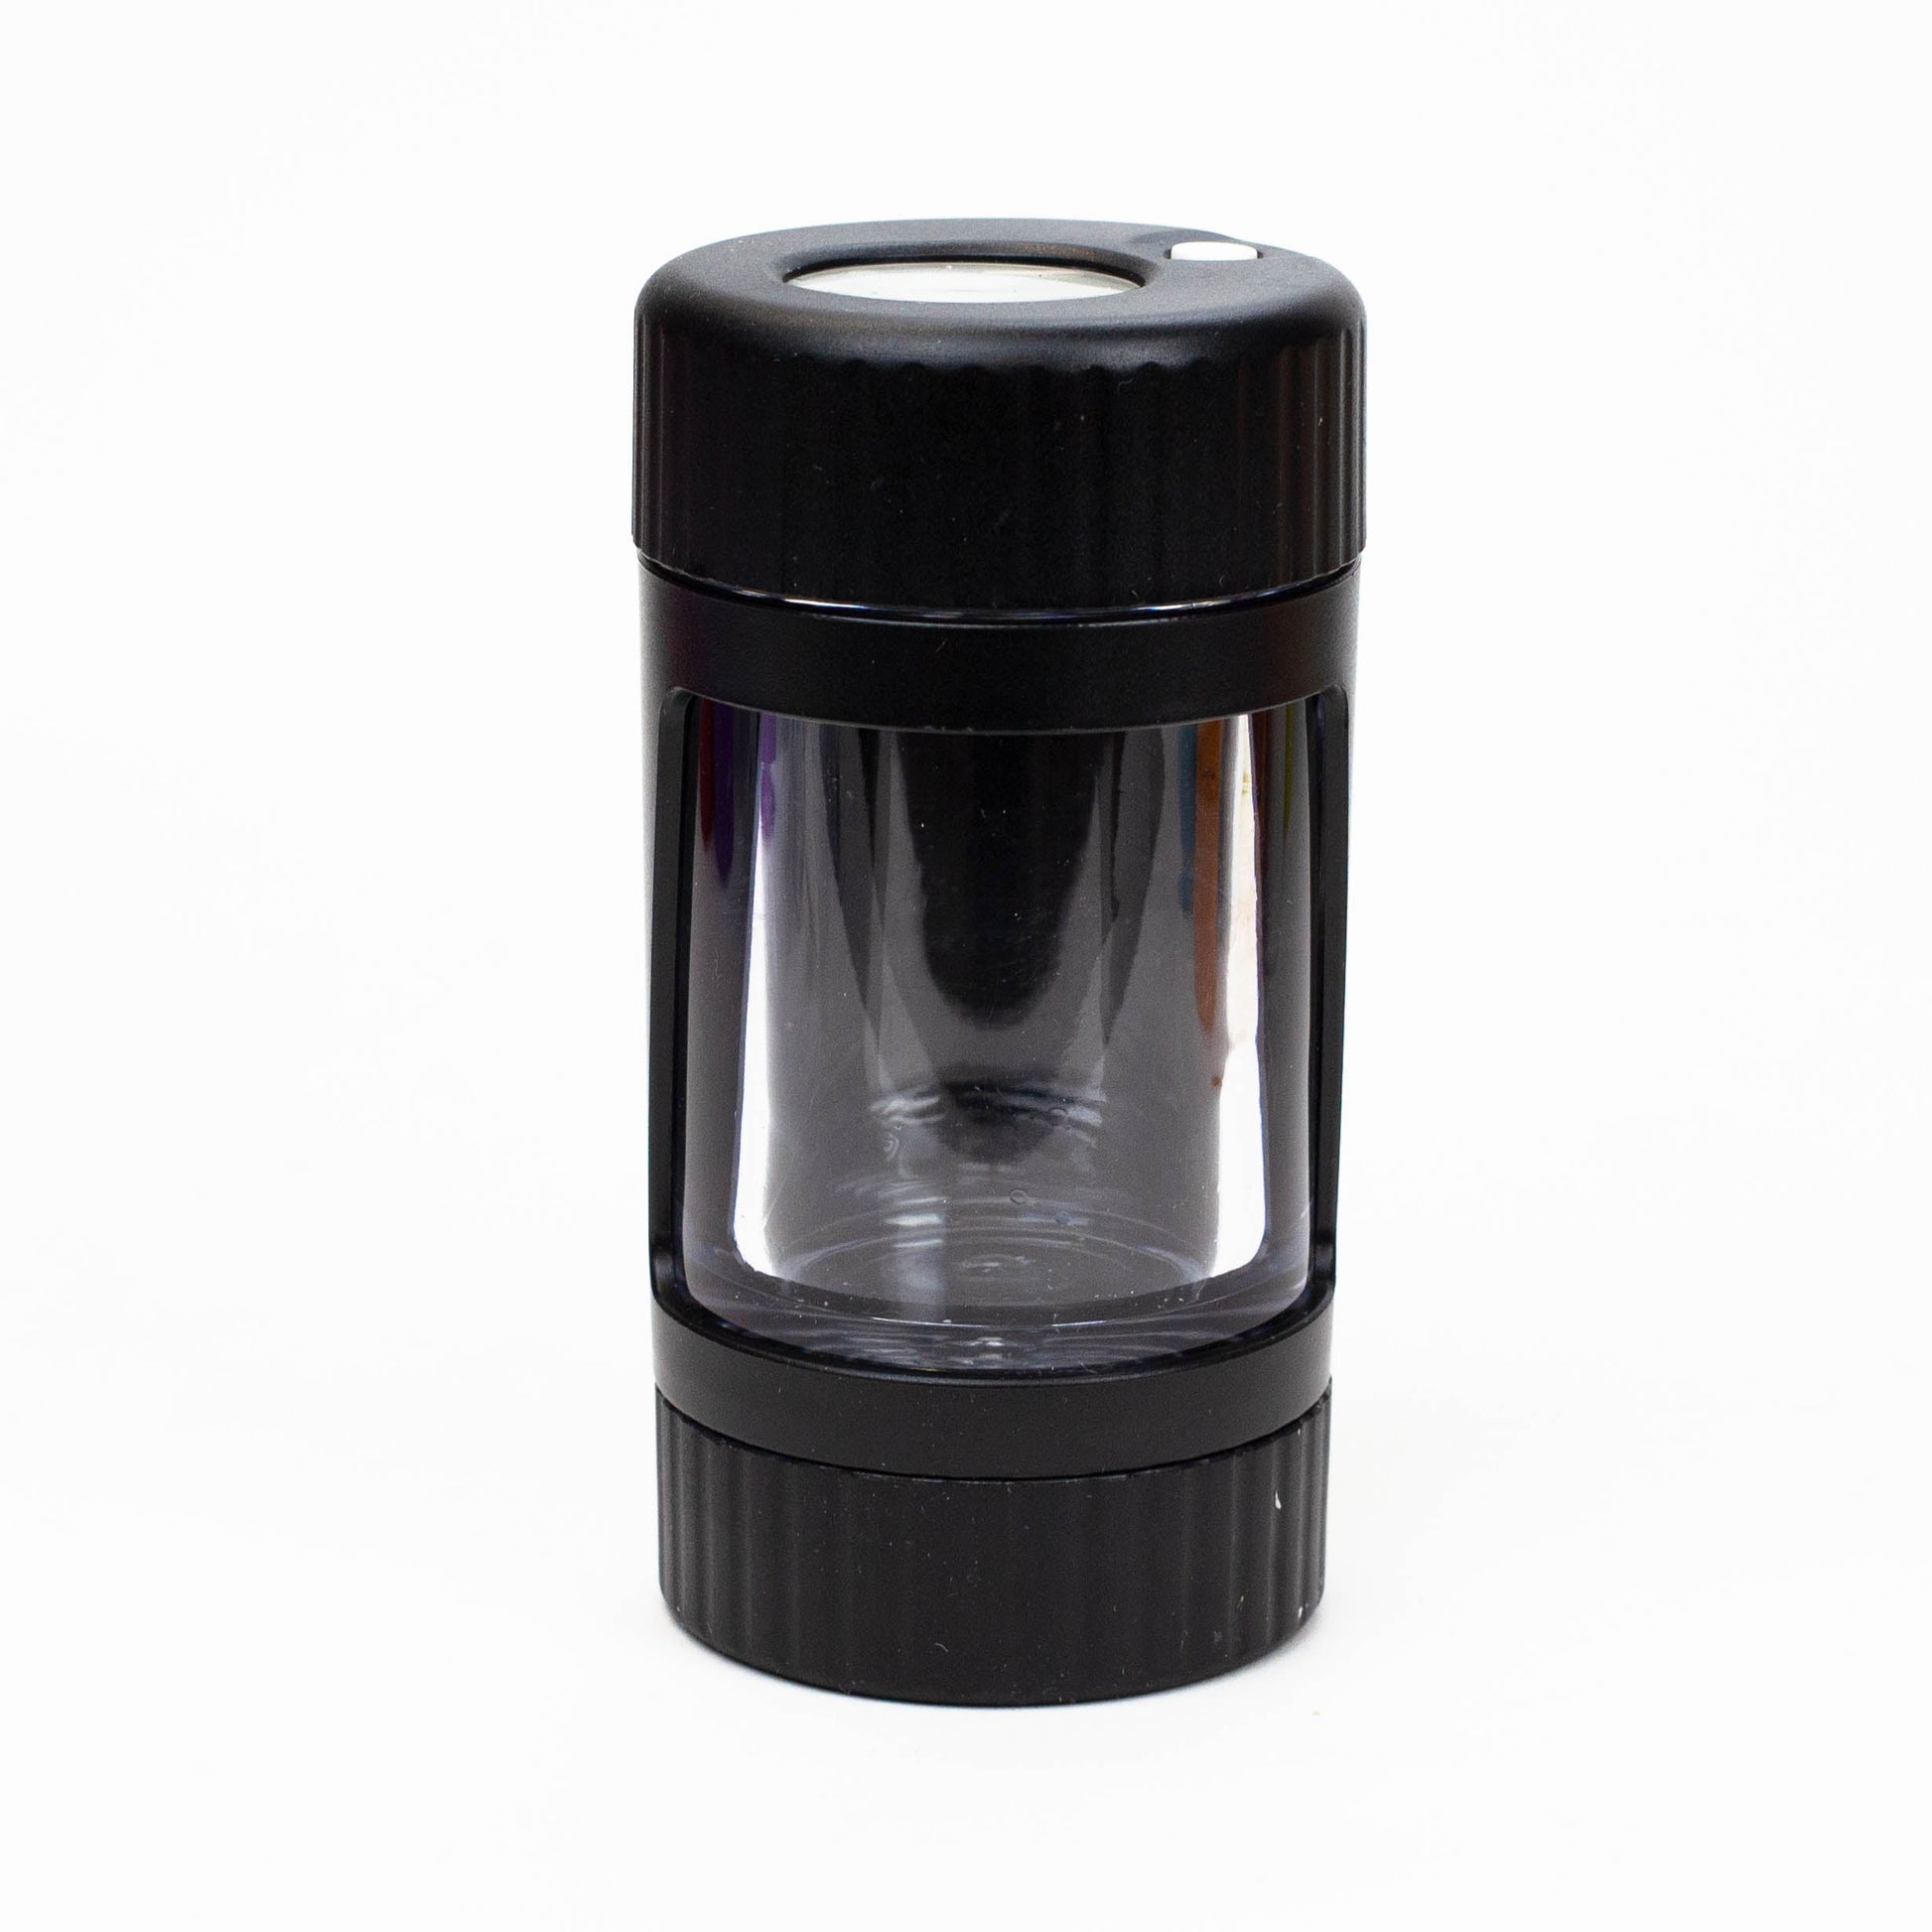 4-in-1 Magnify Led Jar with a grinder and one hitter_9